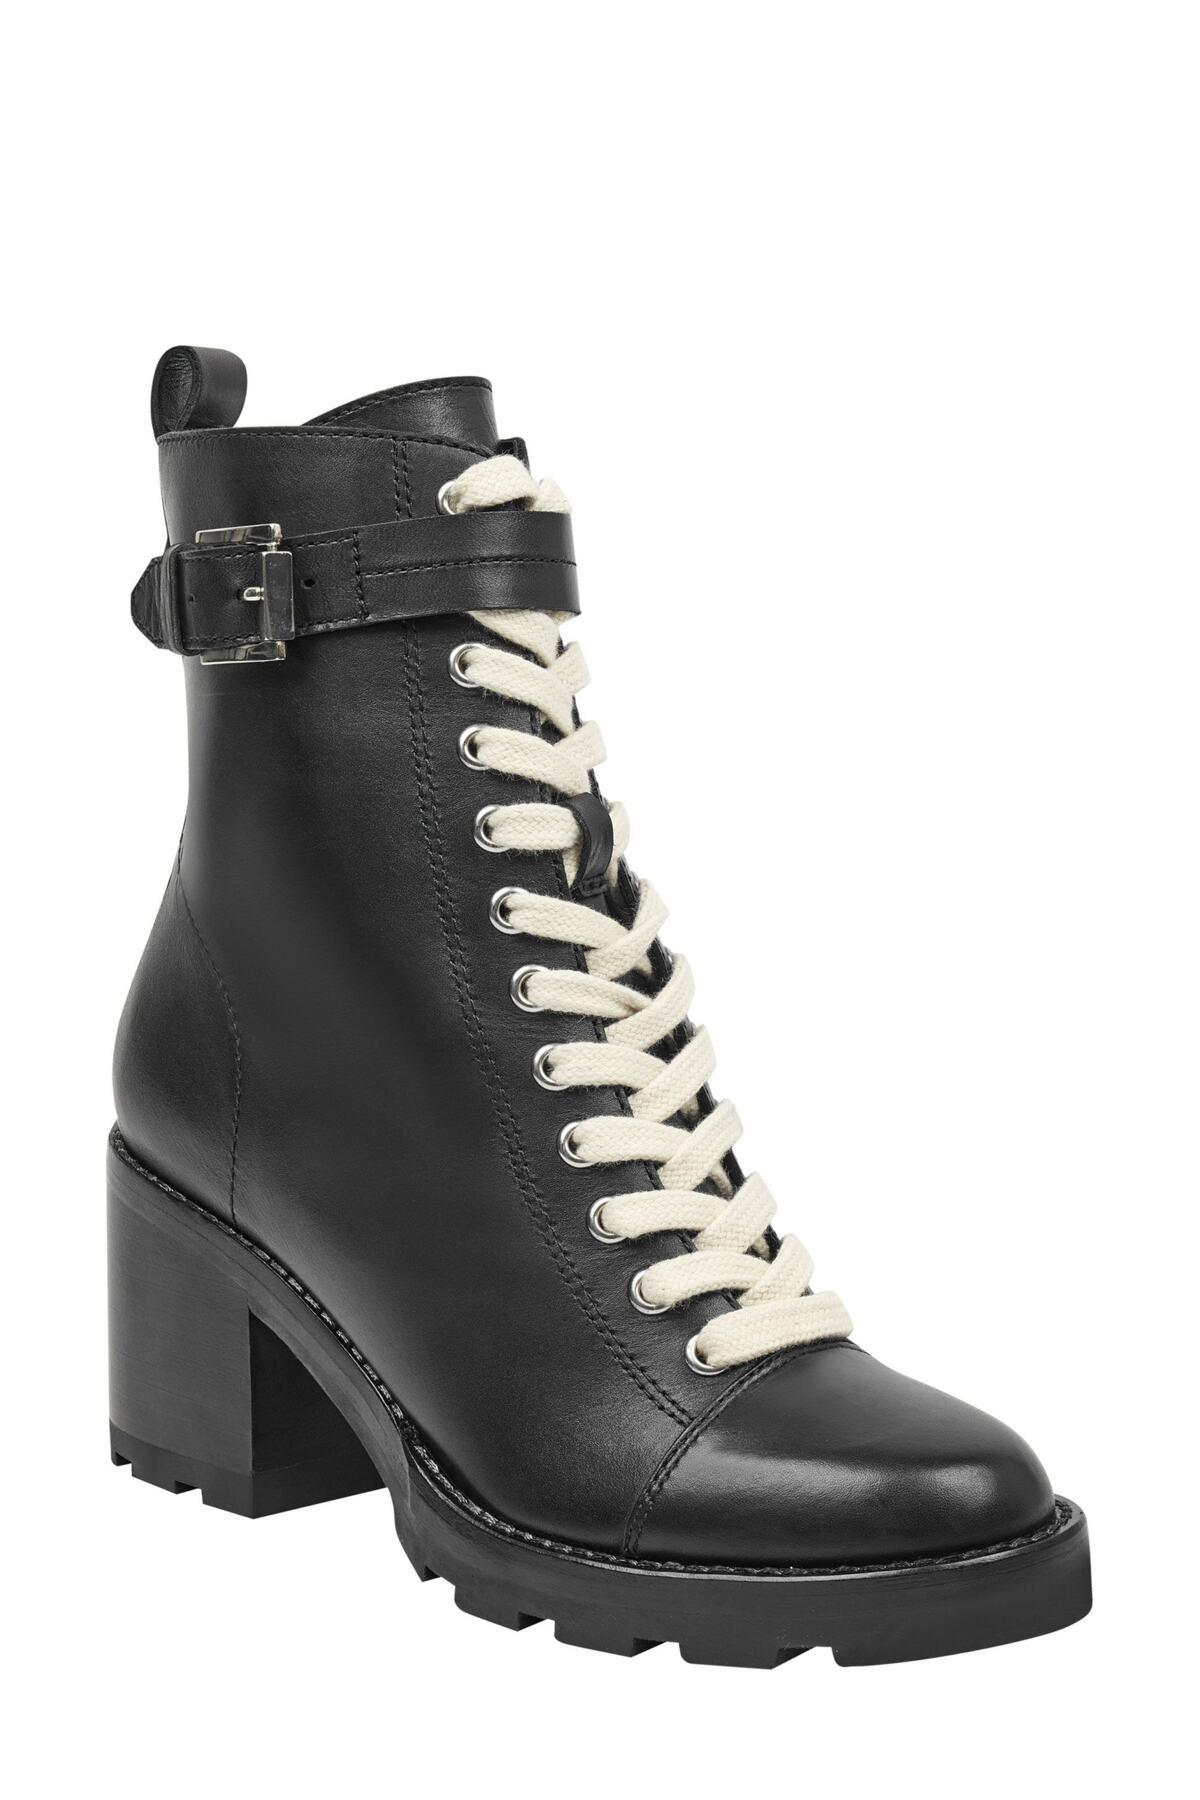 Marc Fisher Waren Leather Combat Boots in Black Lyst